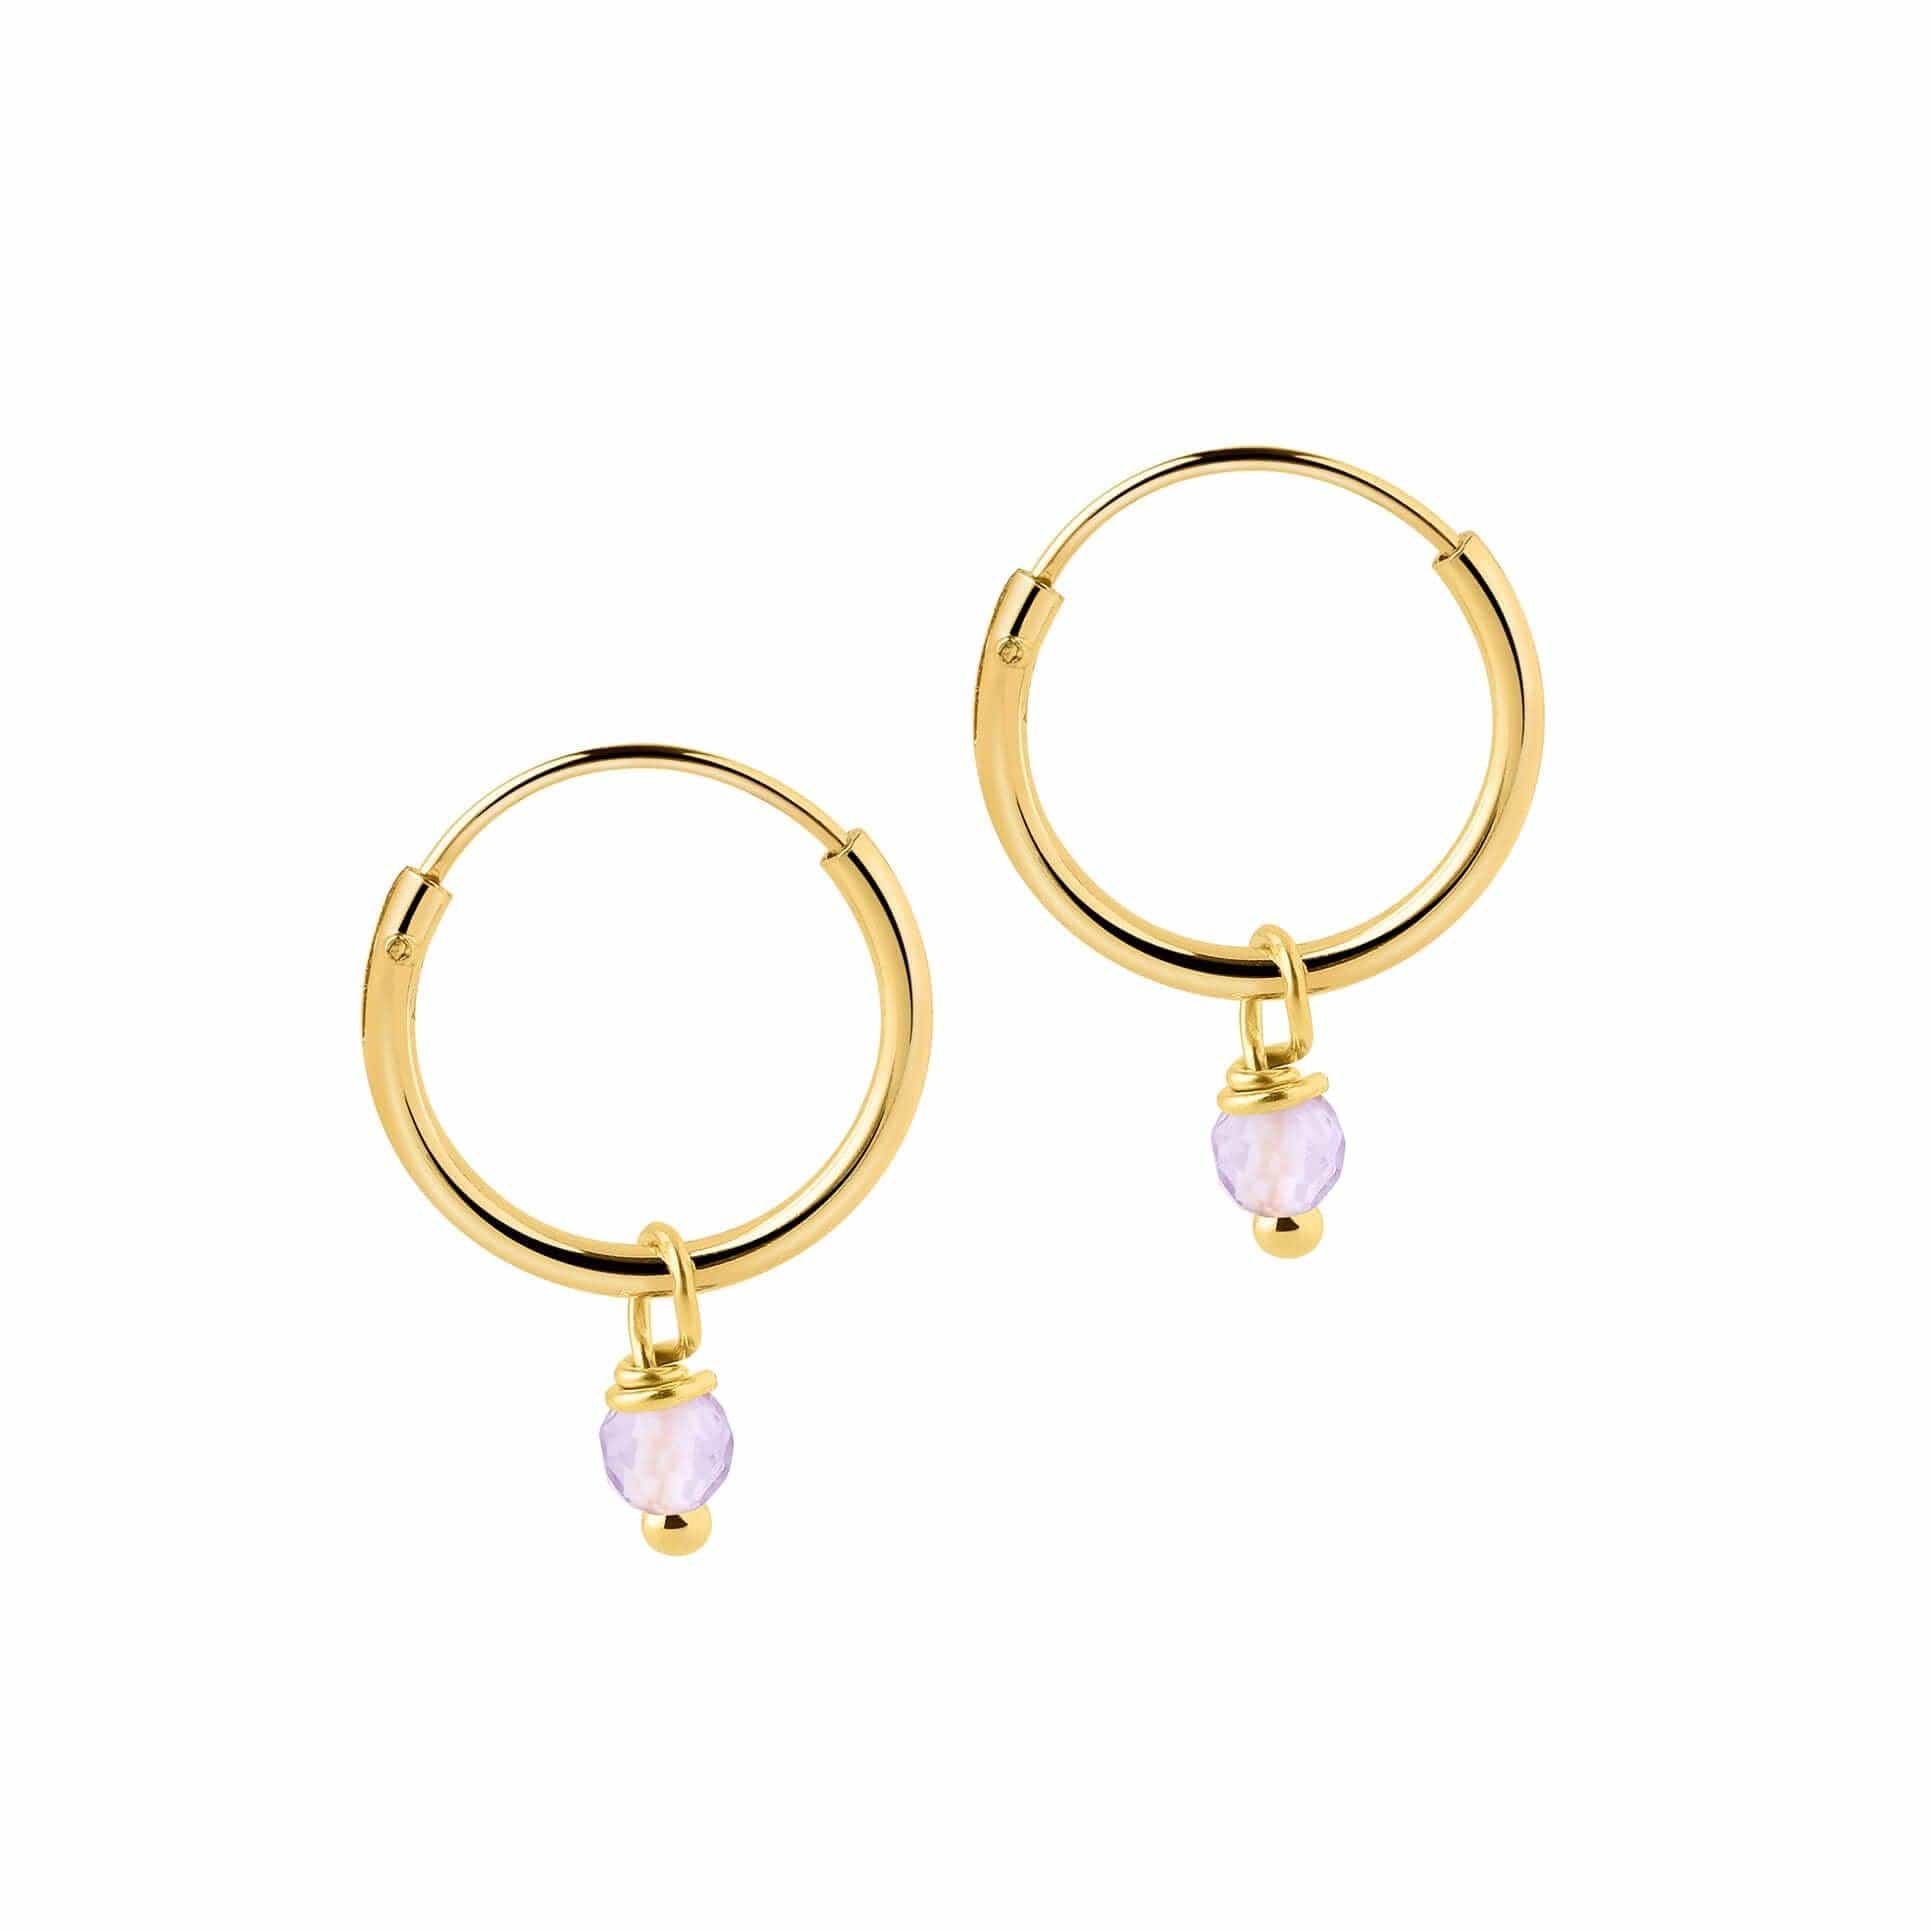 Small Gold Plated Hoop Earrings with Purple Stone